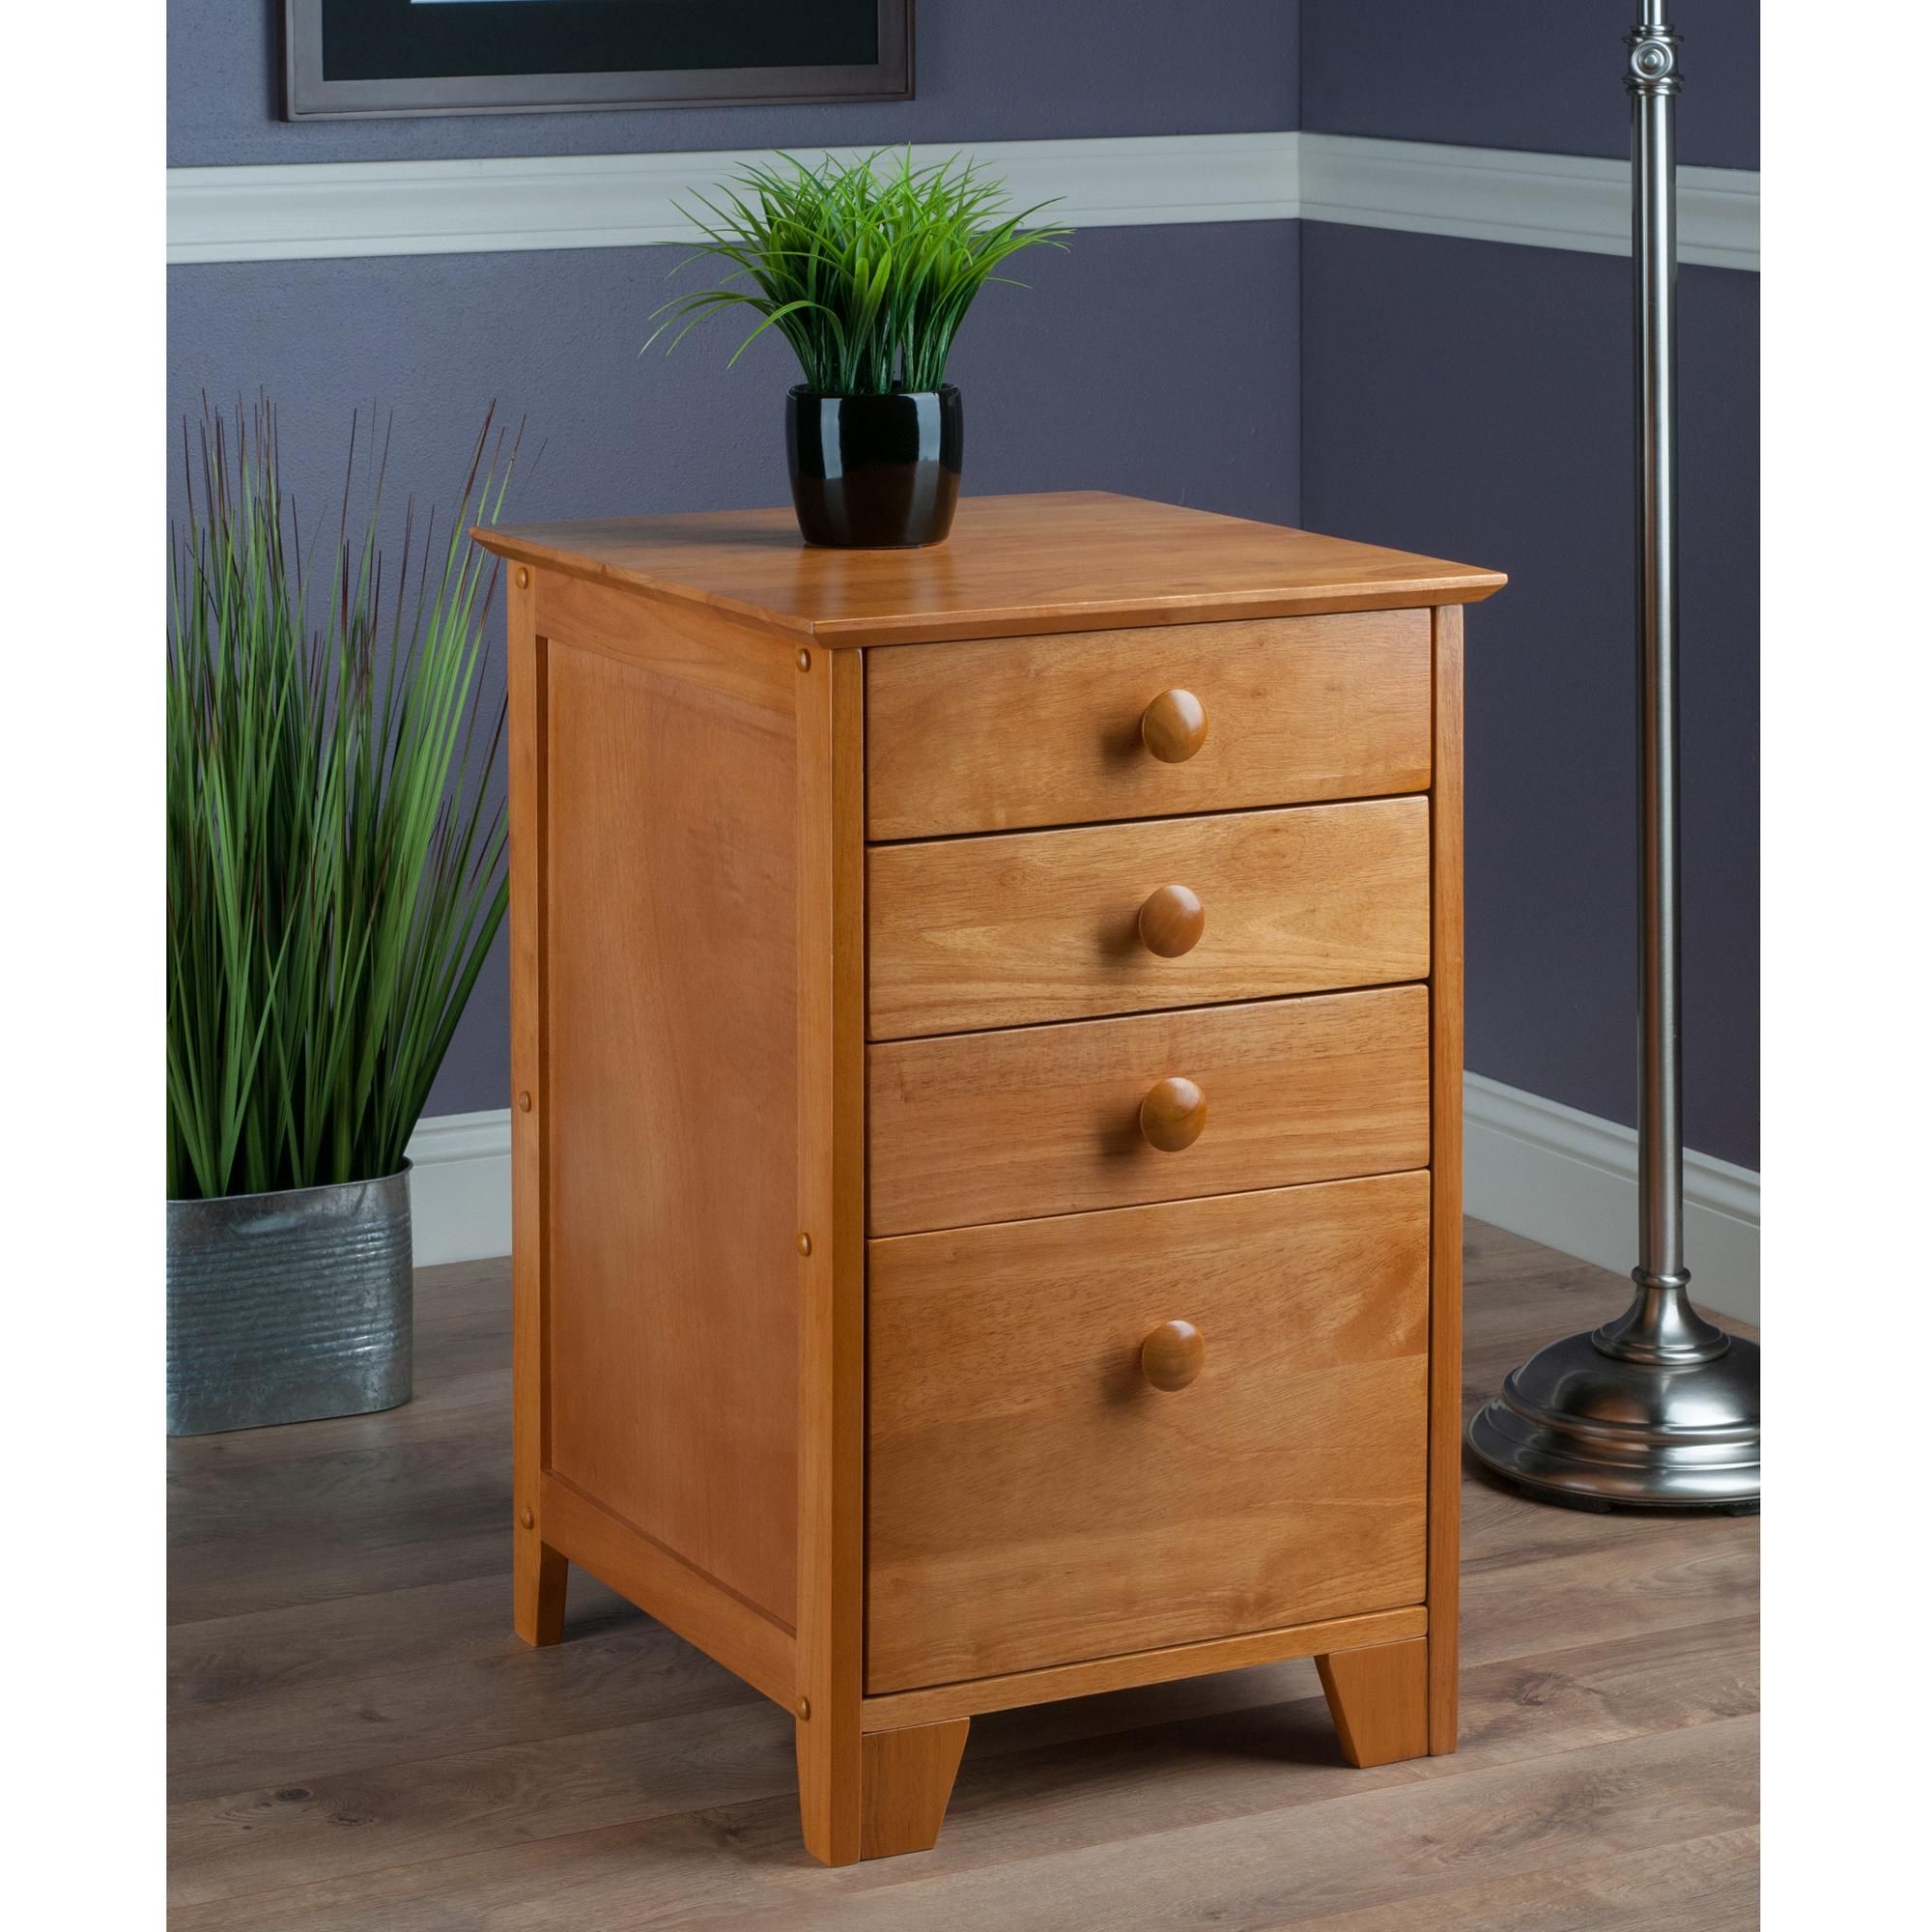 Favorite Winsome Wood File Cabinet With 4 Drawers, Honey: Amazon.ca: Home & Kitchen With Regard To Wood Cabinet With Drawers (Photo 1 of 15)